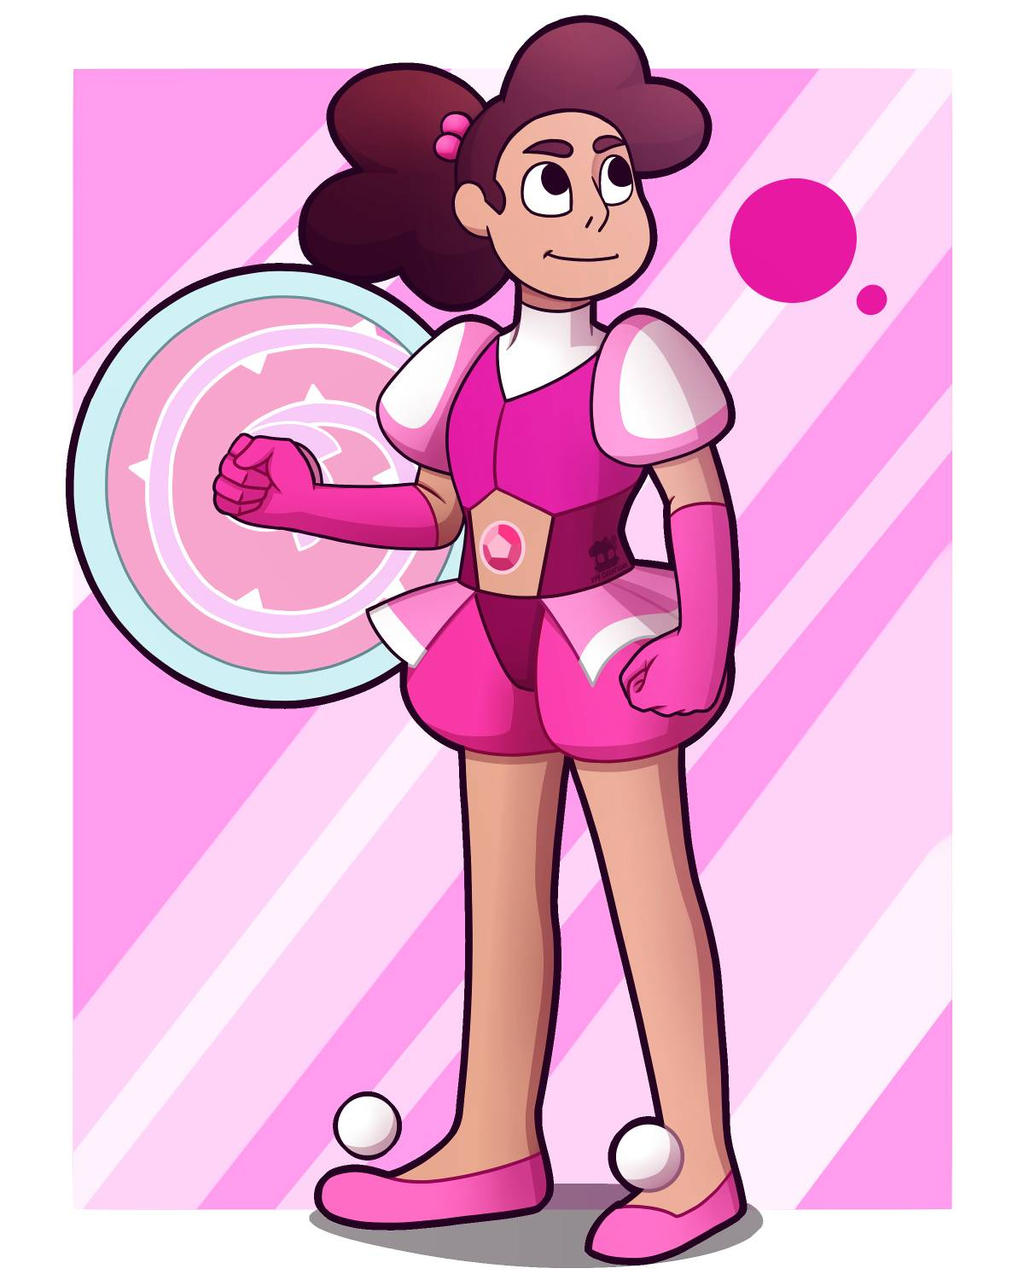 Stevonnie in Pink Diamond's clothes by VMCreations02 on DeviantArt